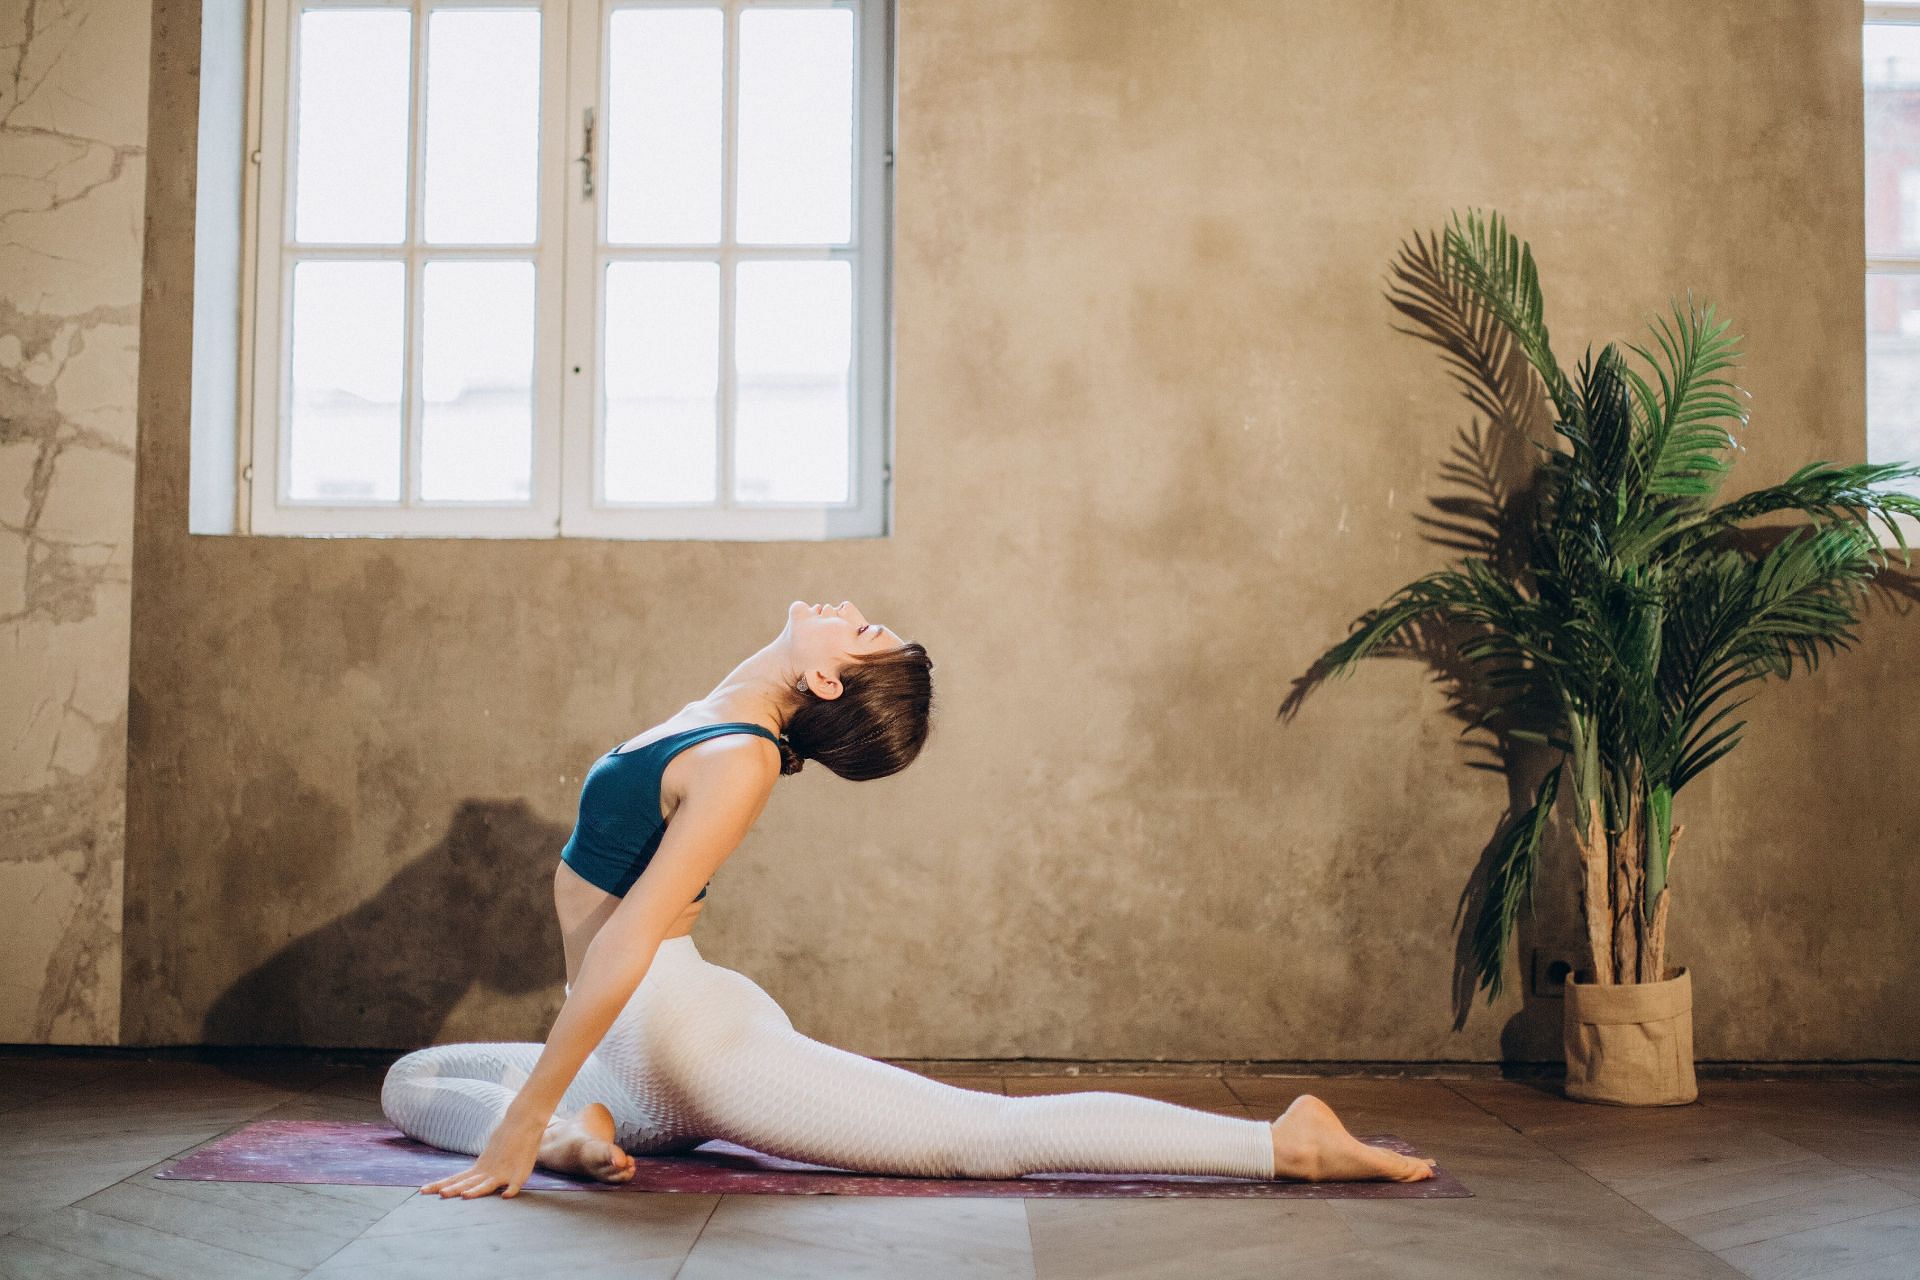 Ten Yoga Poses Every ophthalmologist Should Know & Practise